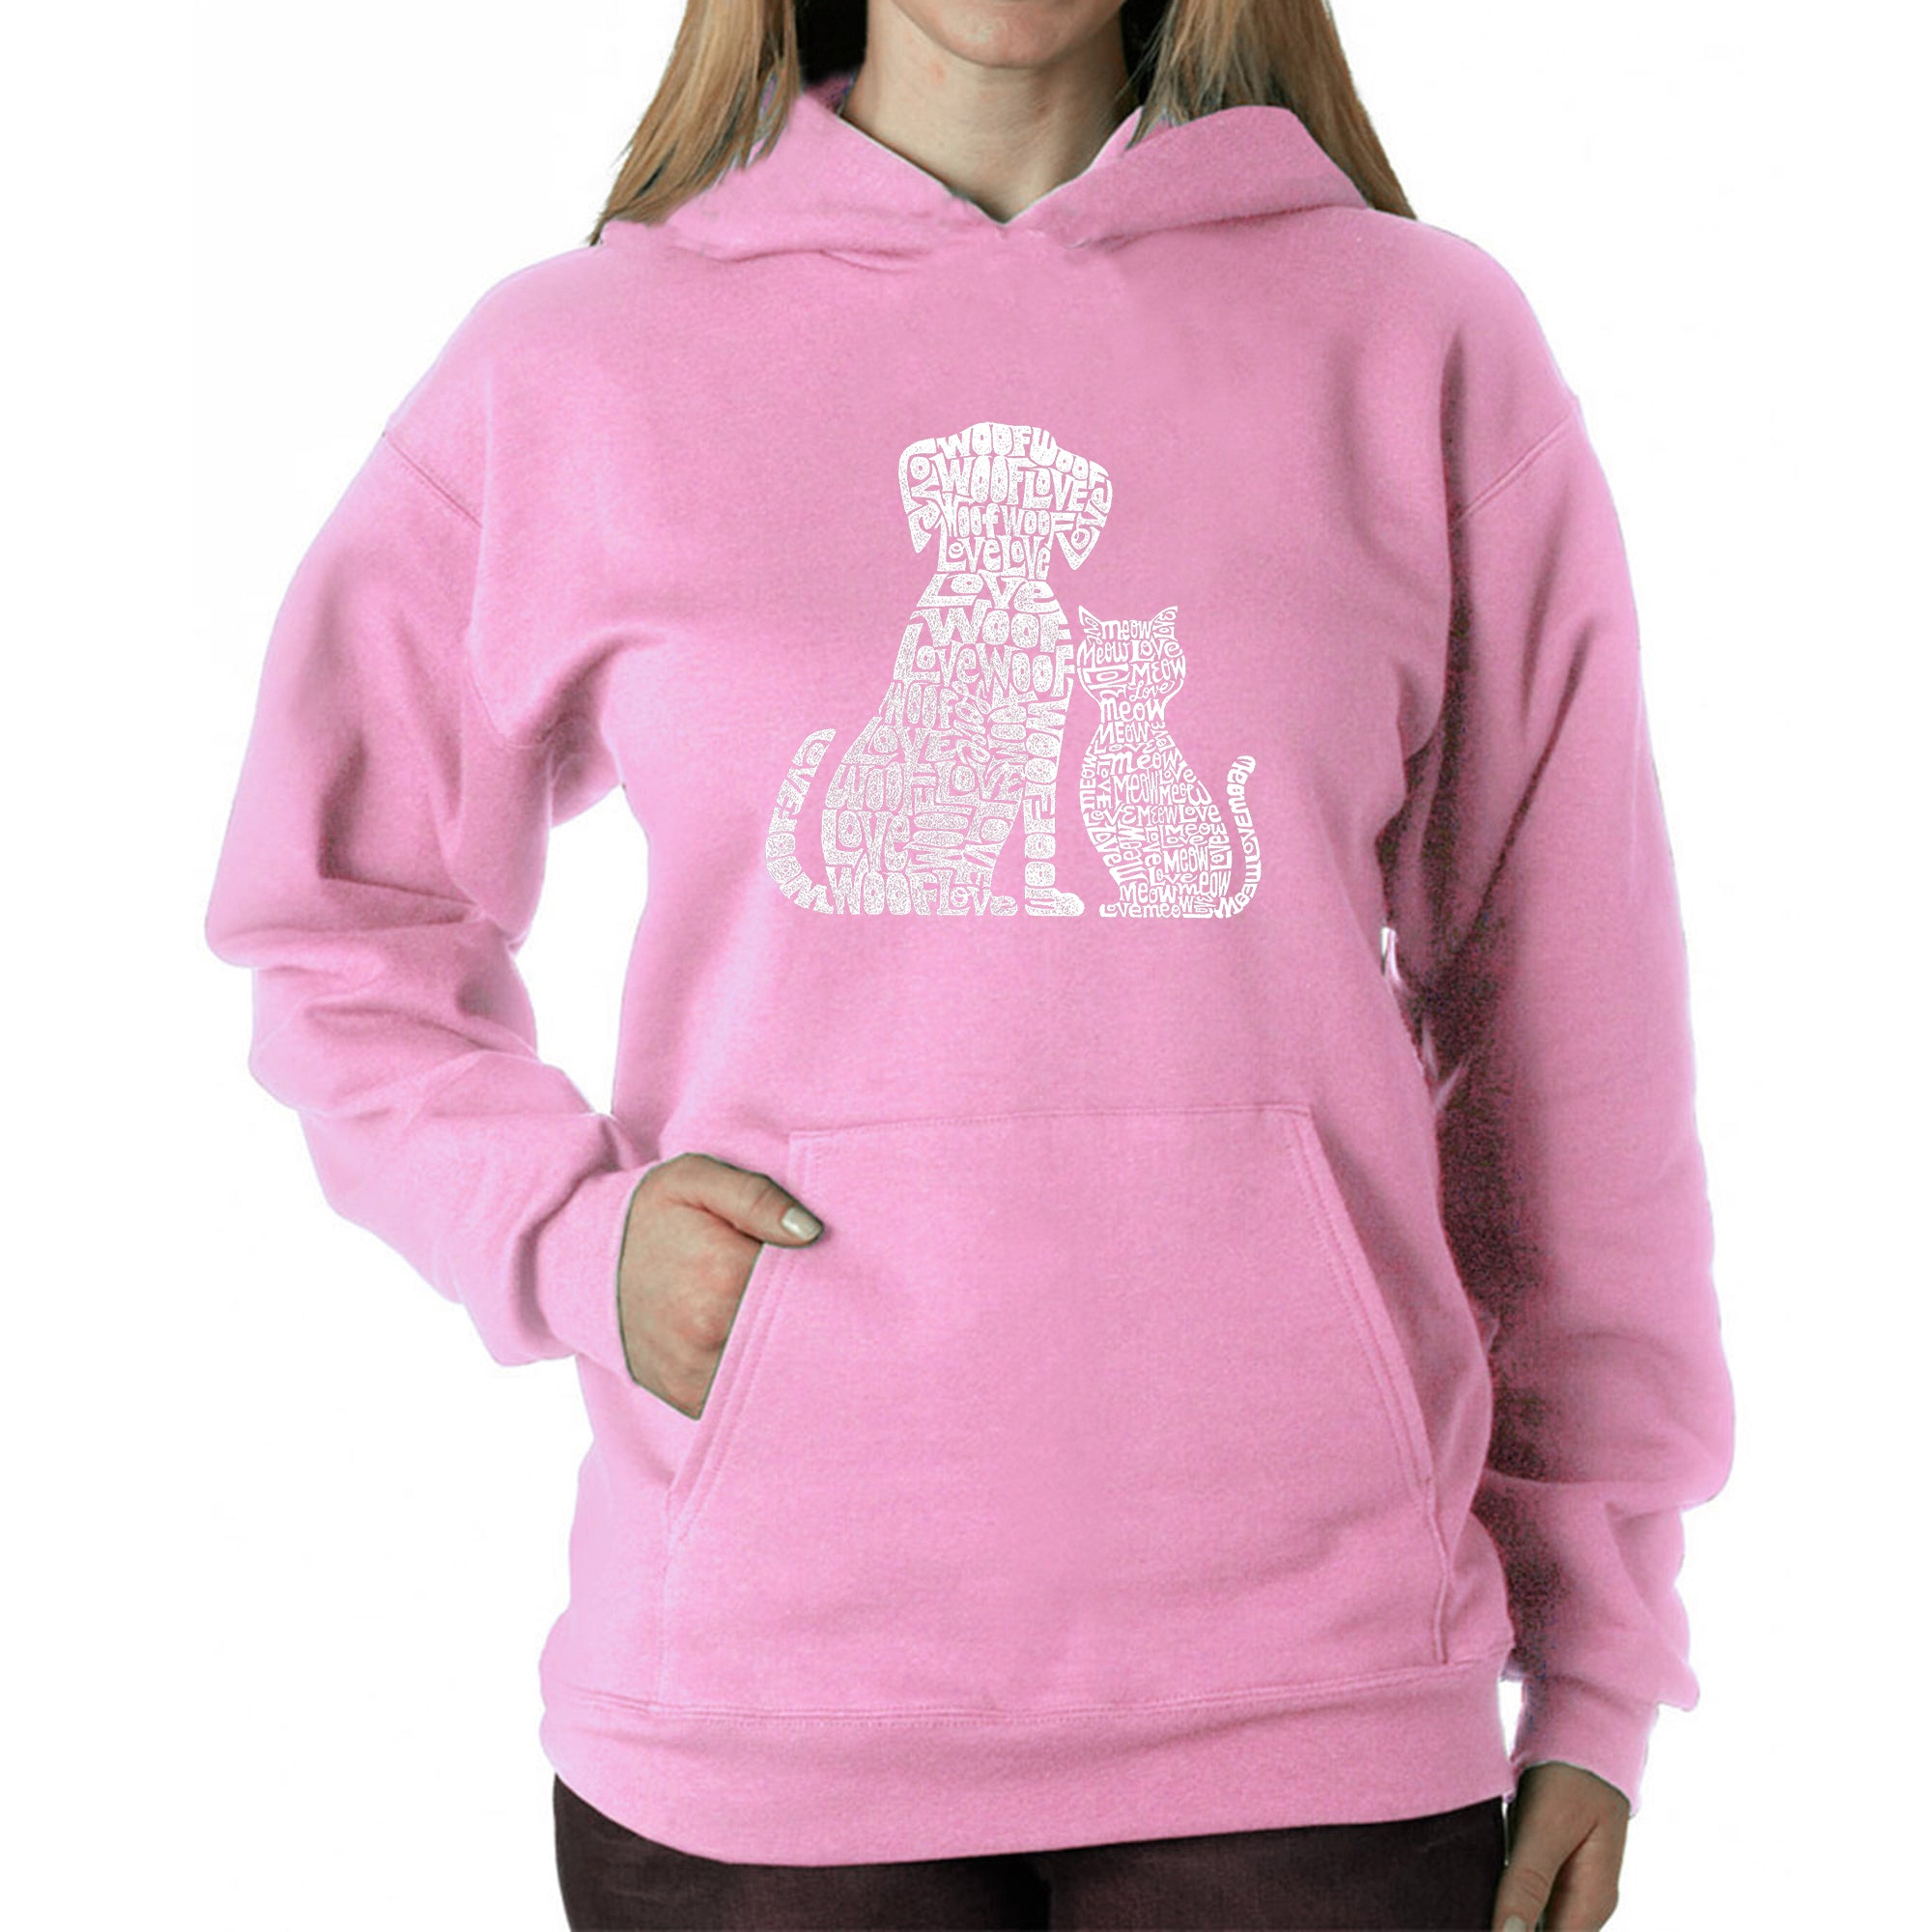 Dogs And Cats - Women's Word Art Hooded Sweatshirt - Purple - XXXX-Large